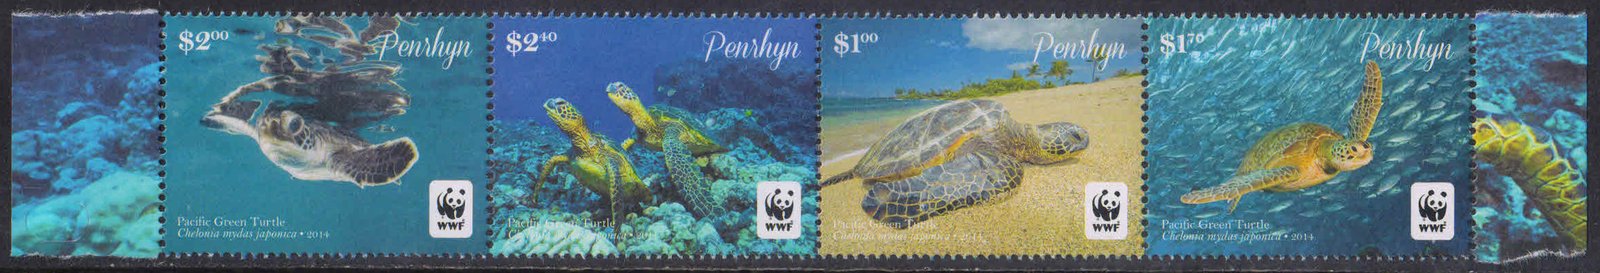 PENRHYN ISLAND 2014 - Endangered Species, Pacific Green Turtles on Sea Bed, Marine Life, WWF, Set of 4 Stamps, MNH, S.G. 645-648, Cat £ 10